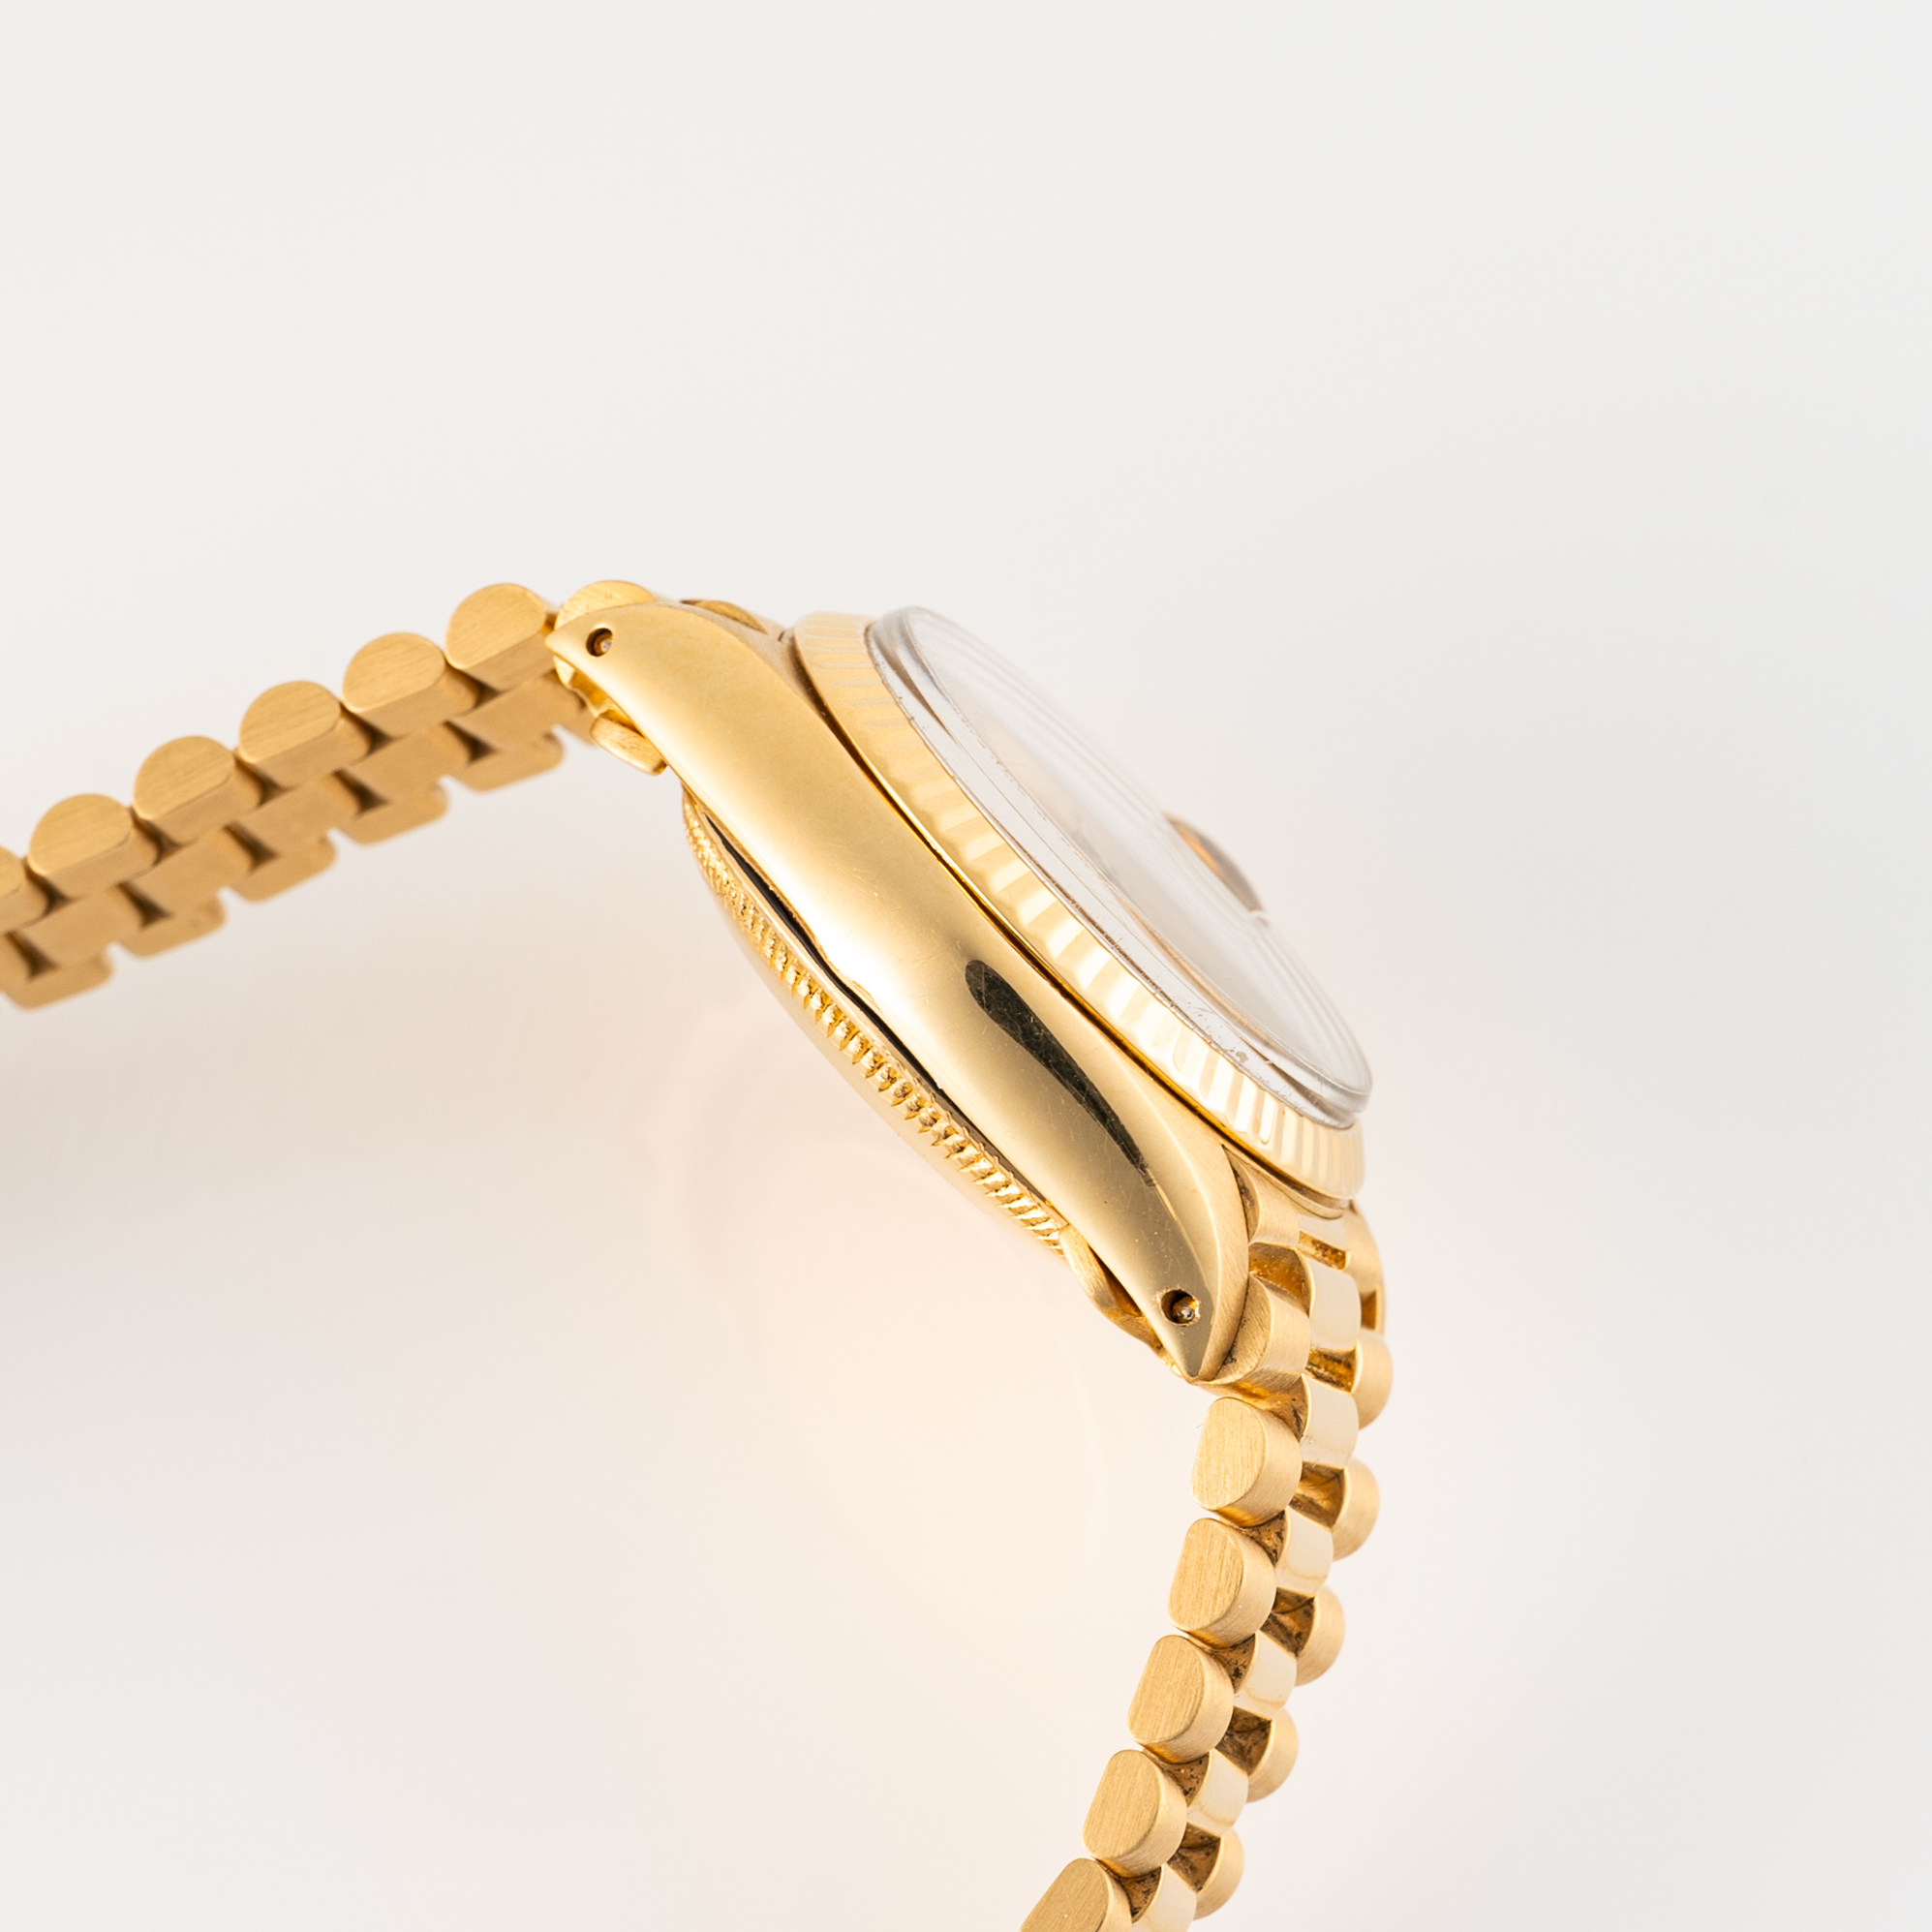 A LADY'S 18K SOLID GOLD ROLEX OYSTER PERPETUAL DATEJUST BRACELET WATCH CIRCA 1979, REF. 6917/8 - Image 5 of 9